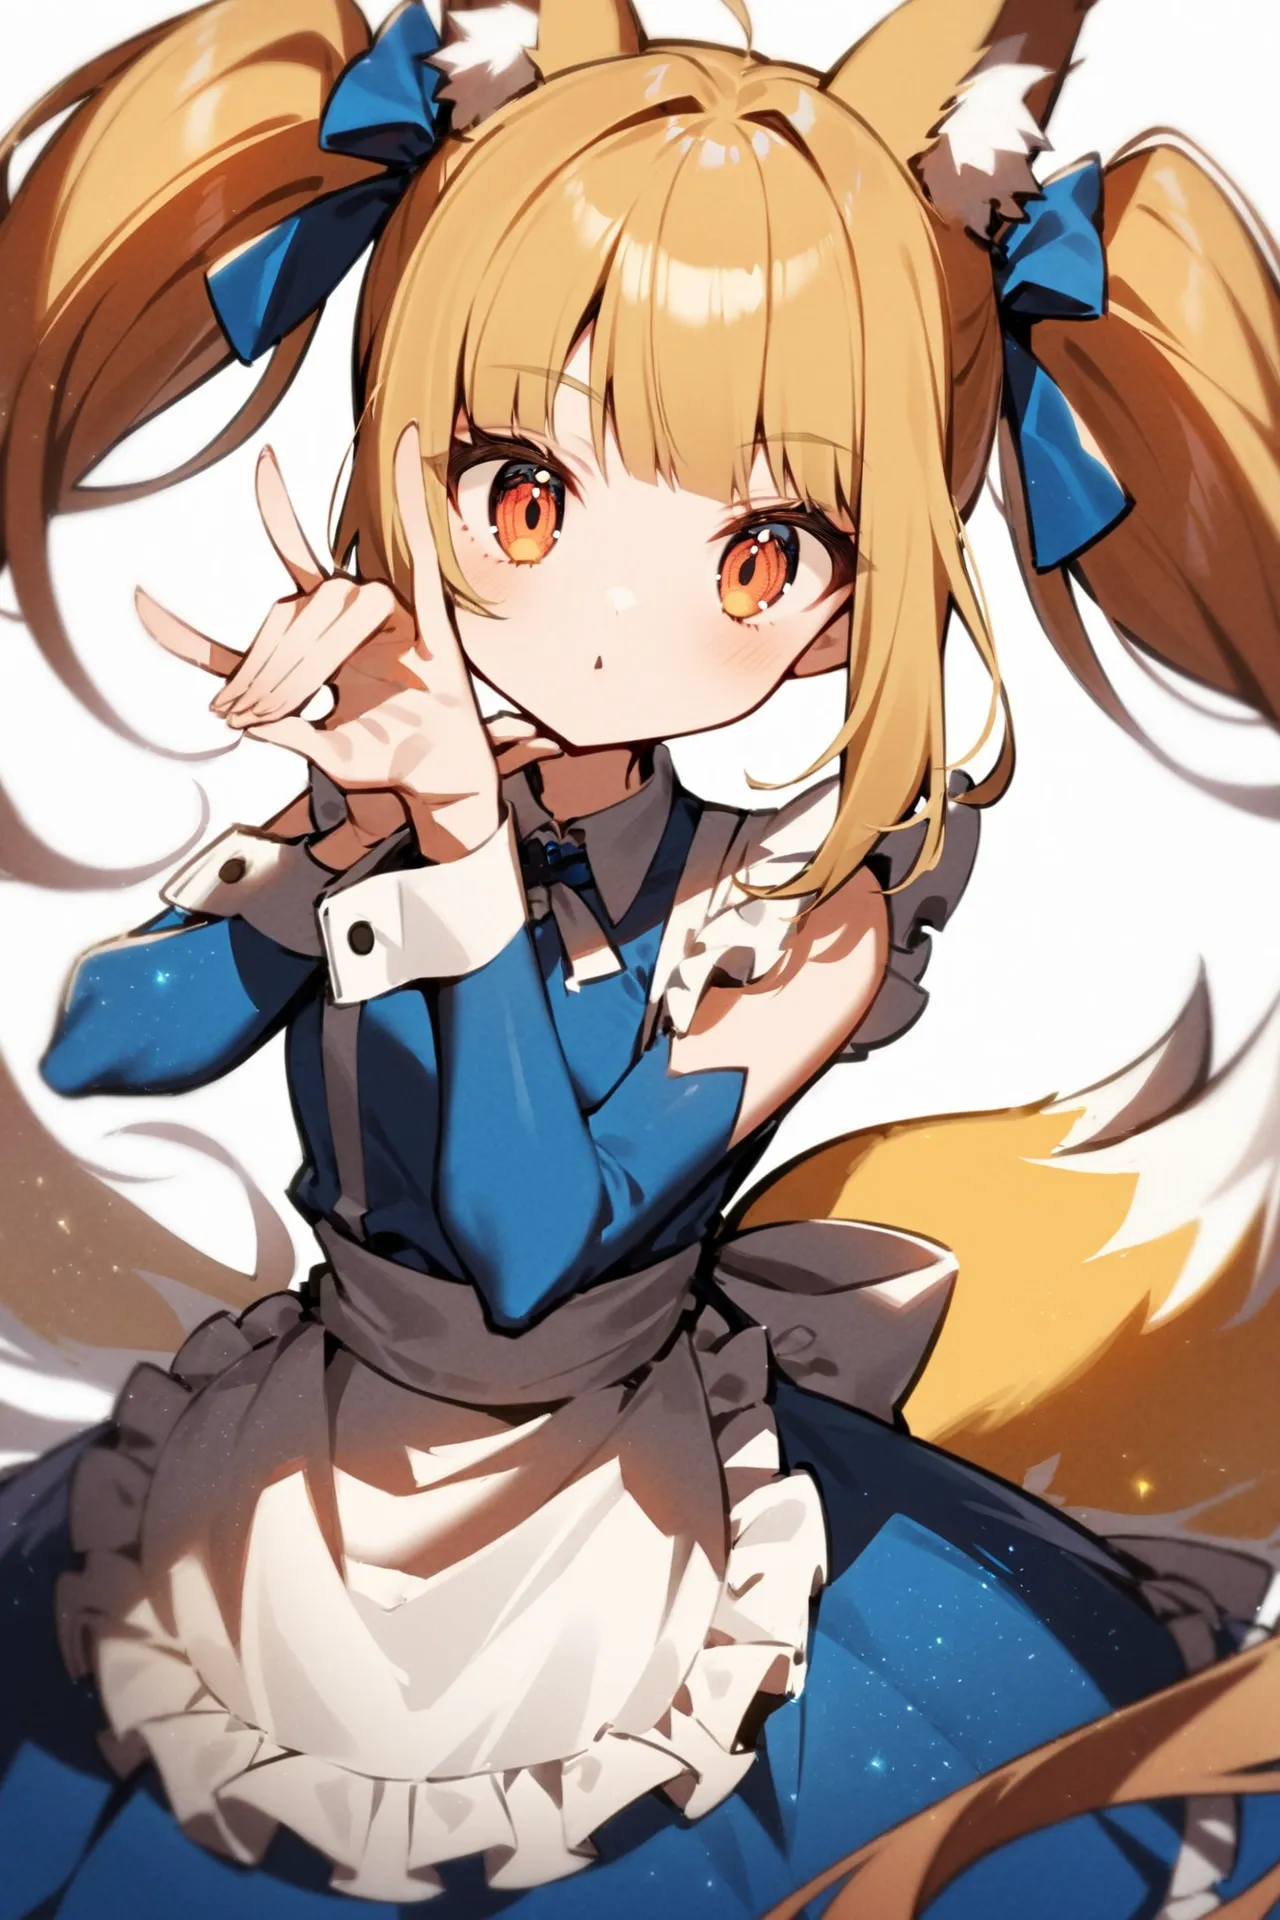 '1girl, fox shadow puppet,\nblonde hair, twintails, blue dress, white apron,\nwhite background,\nAlice in glitterworld\nNegative prompt: (worst quality, low quality:1.4), nsfw\nSteps: 35, Sampler: DPM++ 2M SDE Karras, CFG scale: 7, Seed: 1, Size: 640x960, Model hash: 642b08ca49, Model: ConfusionXL2.0_fp16_vae, VAE hash: 63aeecb90f, VAE: sdxl_vae_0.9.safetensors, Denoising strength: 0.6, Clip skip: 2, Hires upscale: 2, Hires steps: 15, Hires upscaler: ESRGAN_4x, Eta: 0.68, Version: v1.7.0'